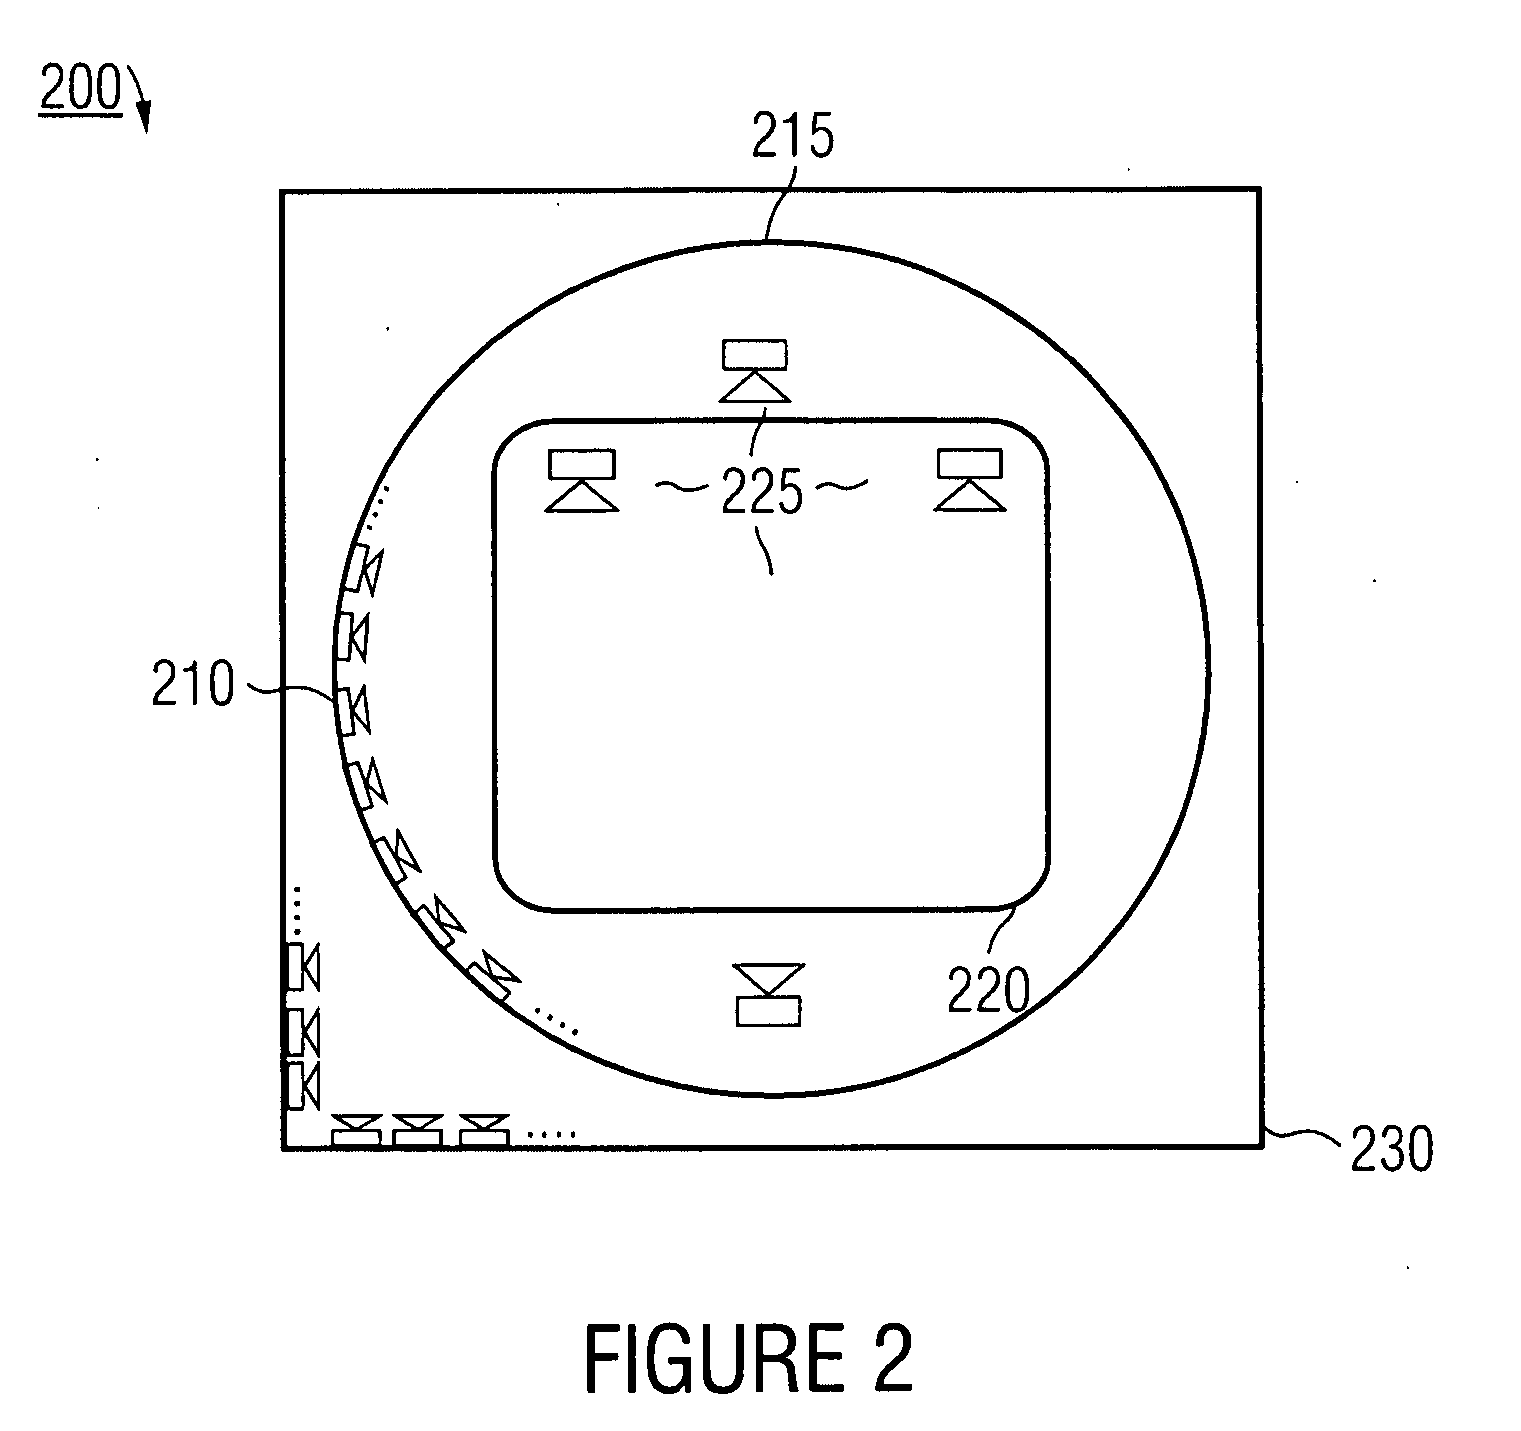 Apparatus and method for generating a number of loudspeaker signals for a loudspeaker array which defines a reproduction space